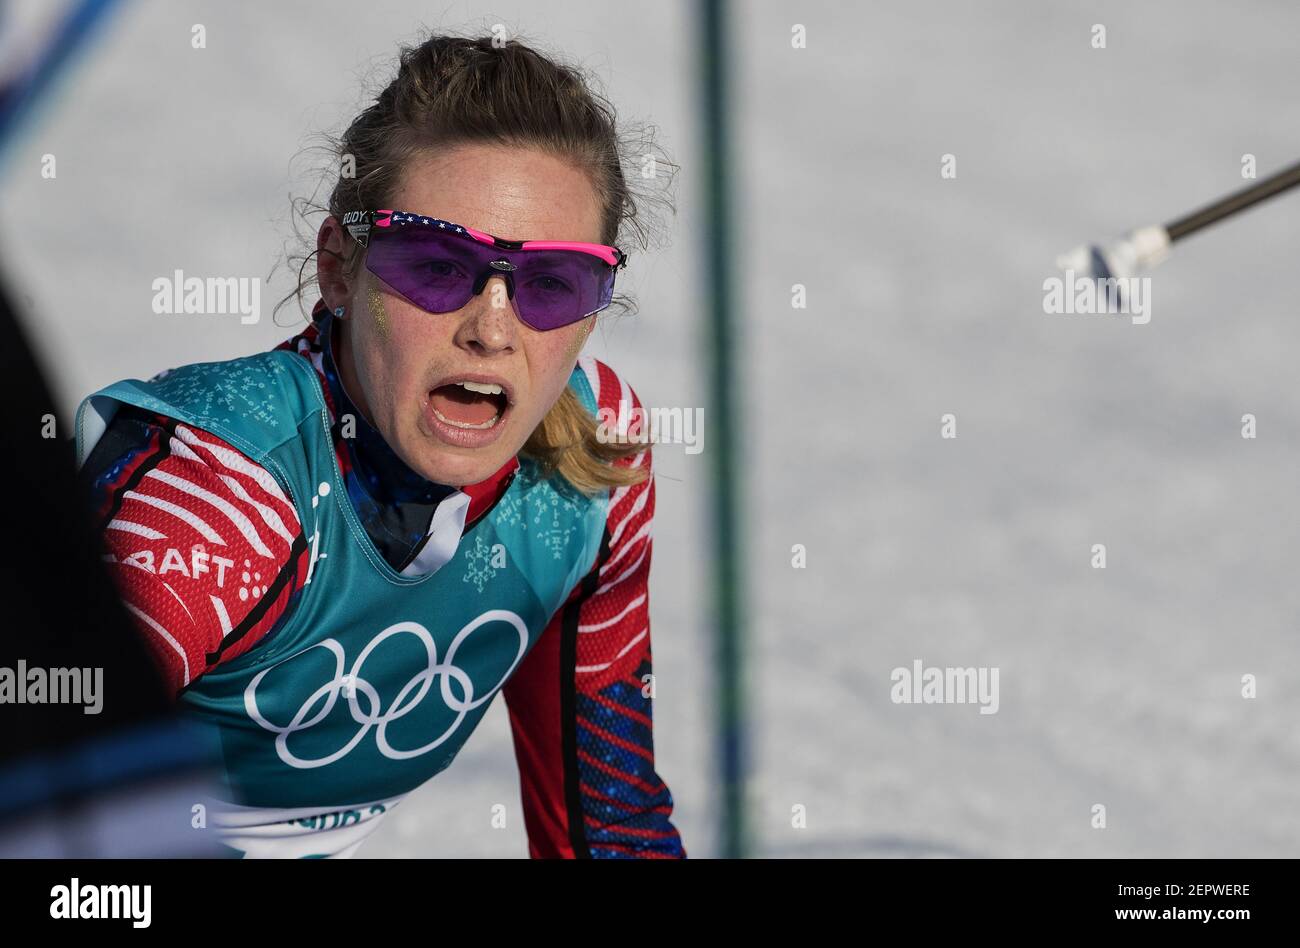 Jessie Diggins of Afton, Minn., catches her breath after finishing fifth in the women's 10km Cross Country freestyle final at Alpensia Cross-Country Centre on Thursday, February 15, 2018, at the Winter Olympics in Pyeongchang, South Korea. (Photo by Carlos Gonzalez/Minneapolis Star Tribune/TNS/Sipa USA) Stock Photo